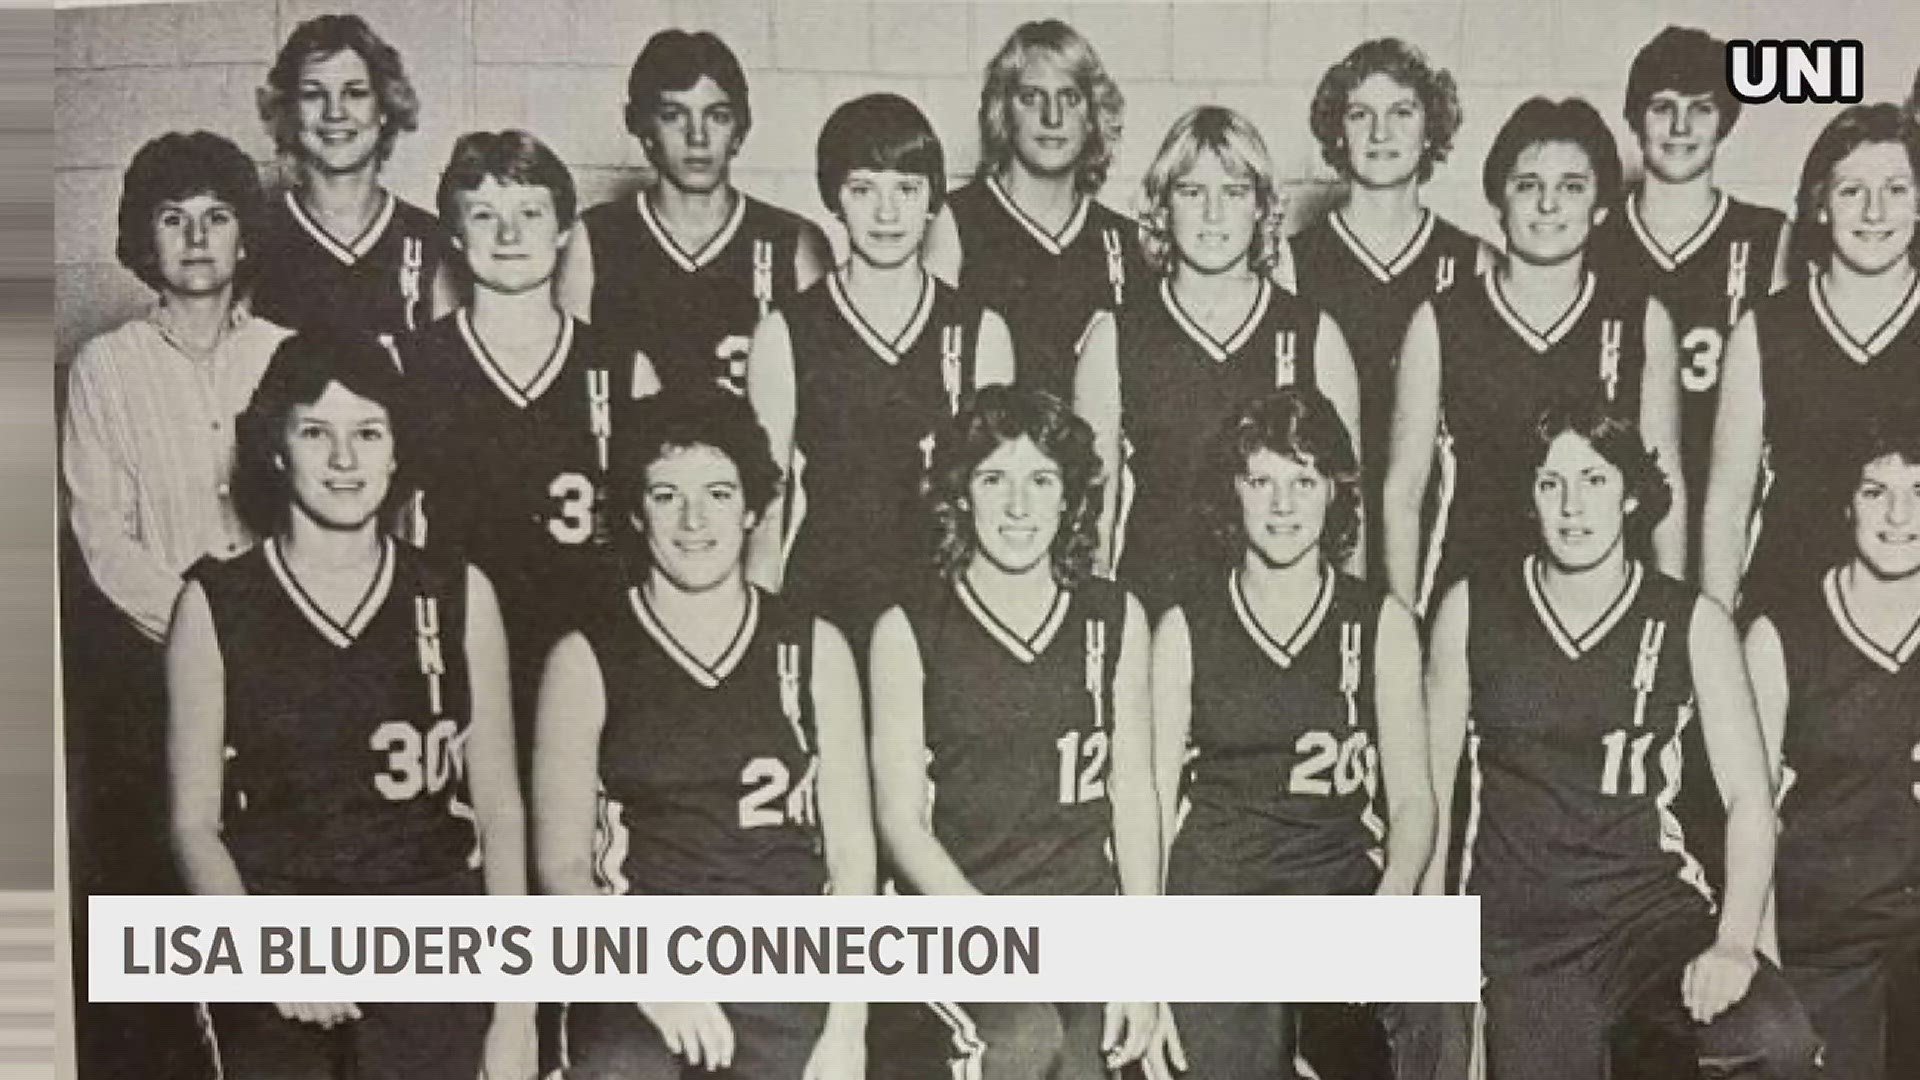 Before she became one of the NCAA's greatest basketball coaches, Lisa Bluder was a three year starter for the University of Northern Iowa Women's Basketball Team.